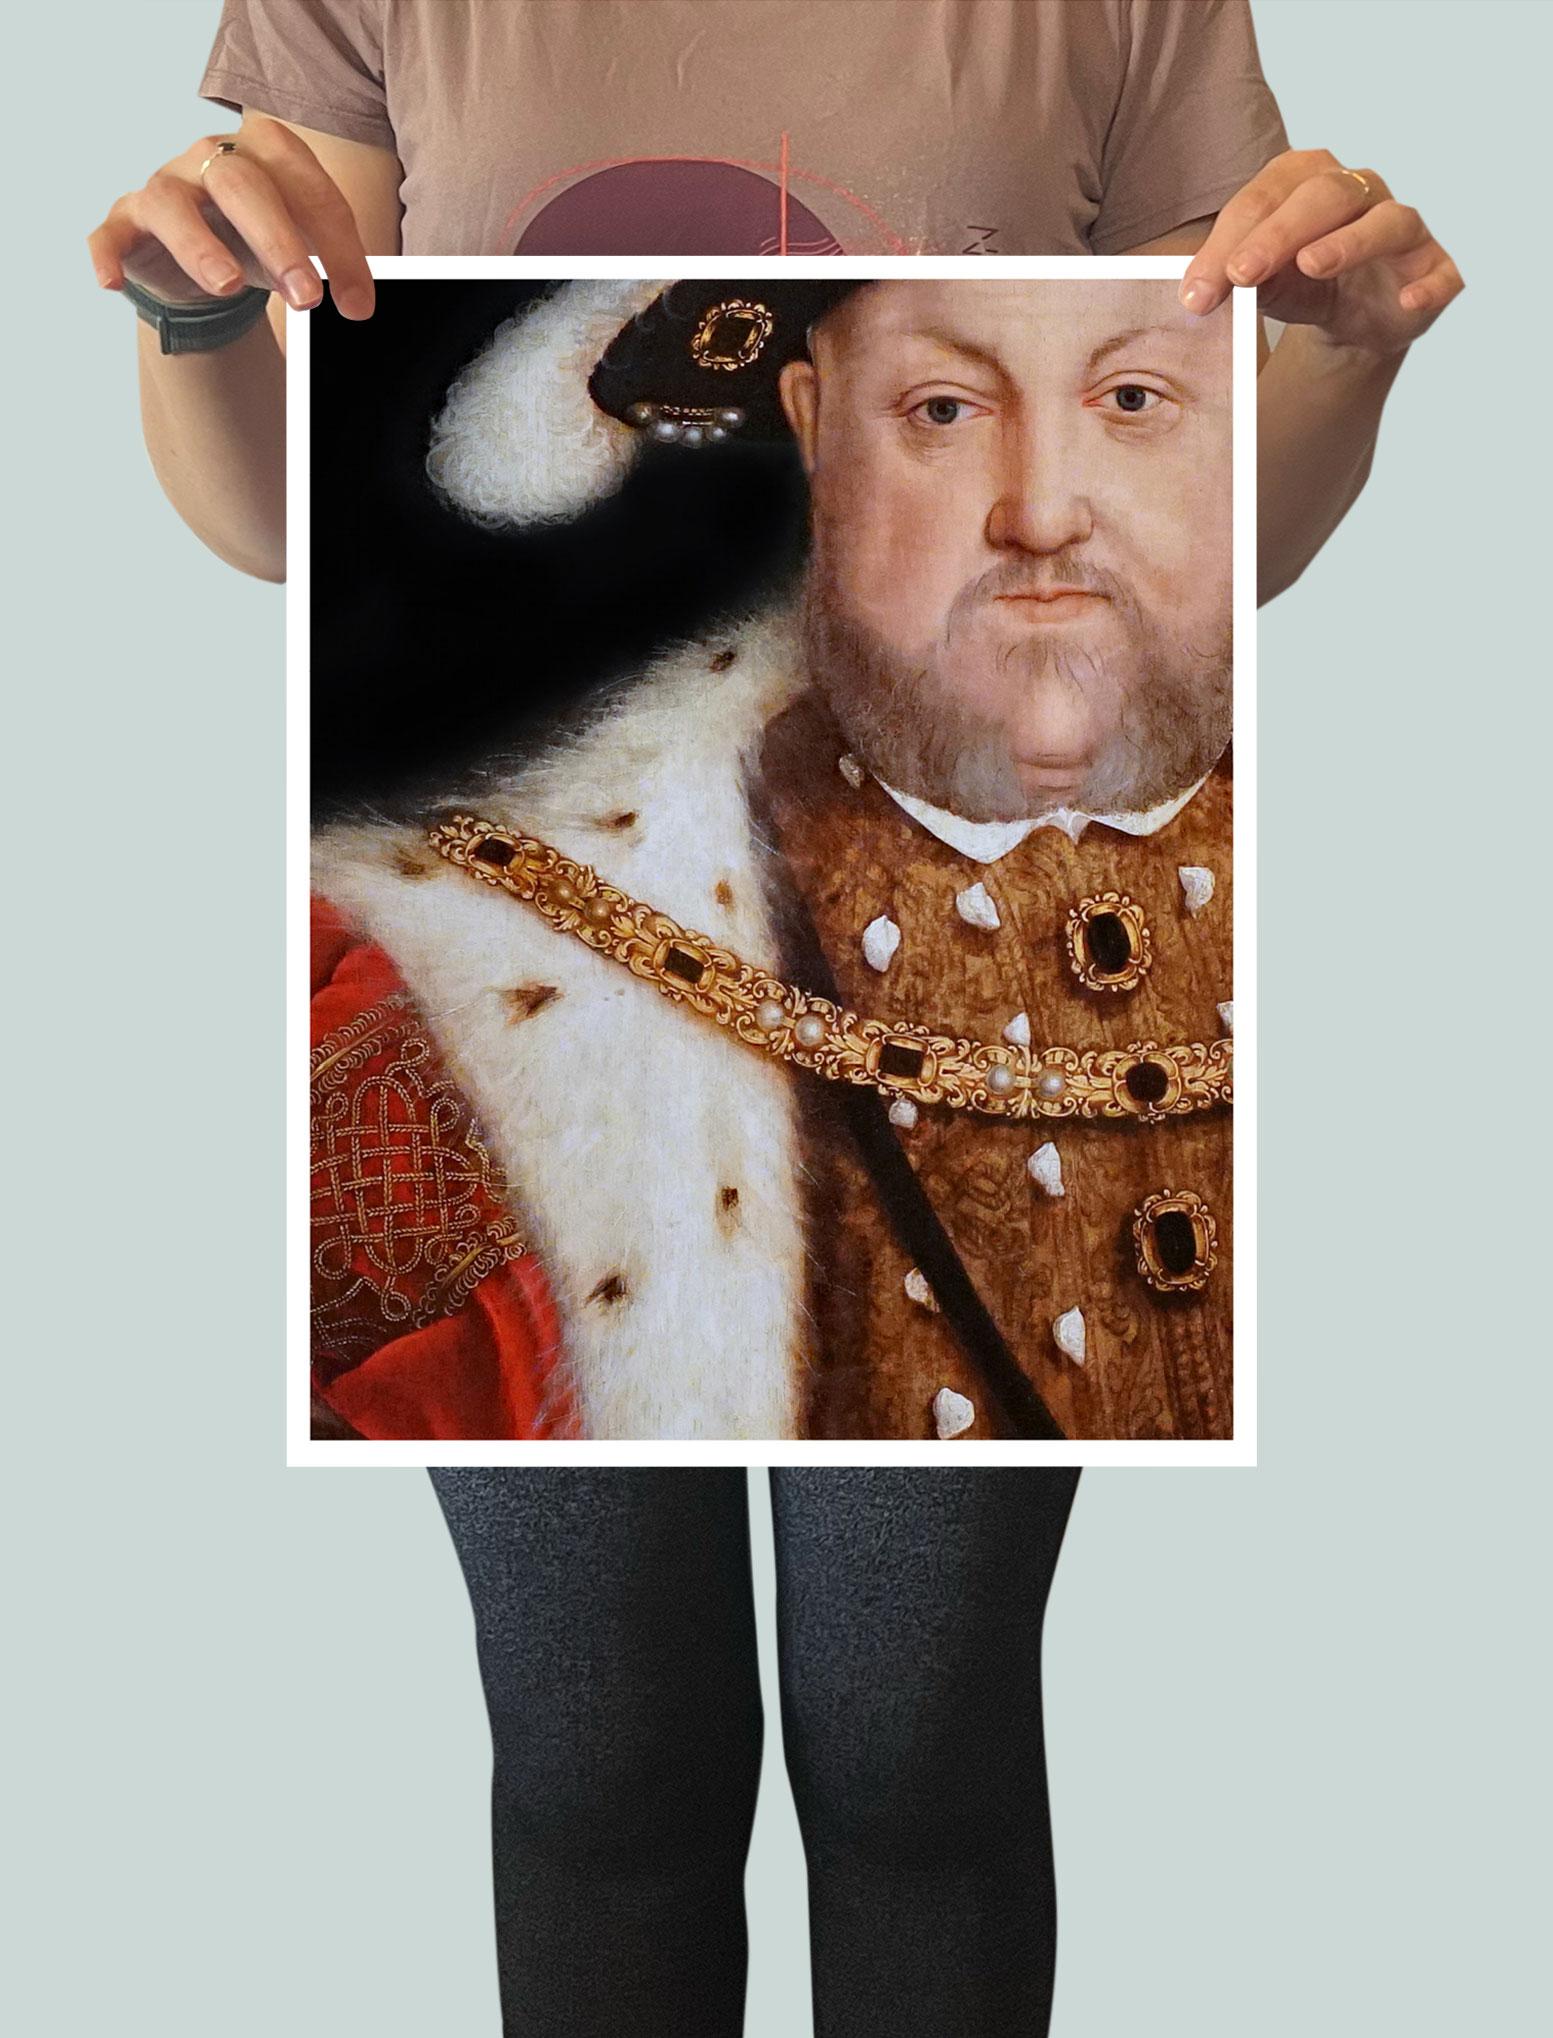  D'aprs Hans Holbein le Jeune (allemand 1497-1543). Le roi Henry VIII d'Angleterre. - Print de (After) Hans Holbein The Younger